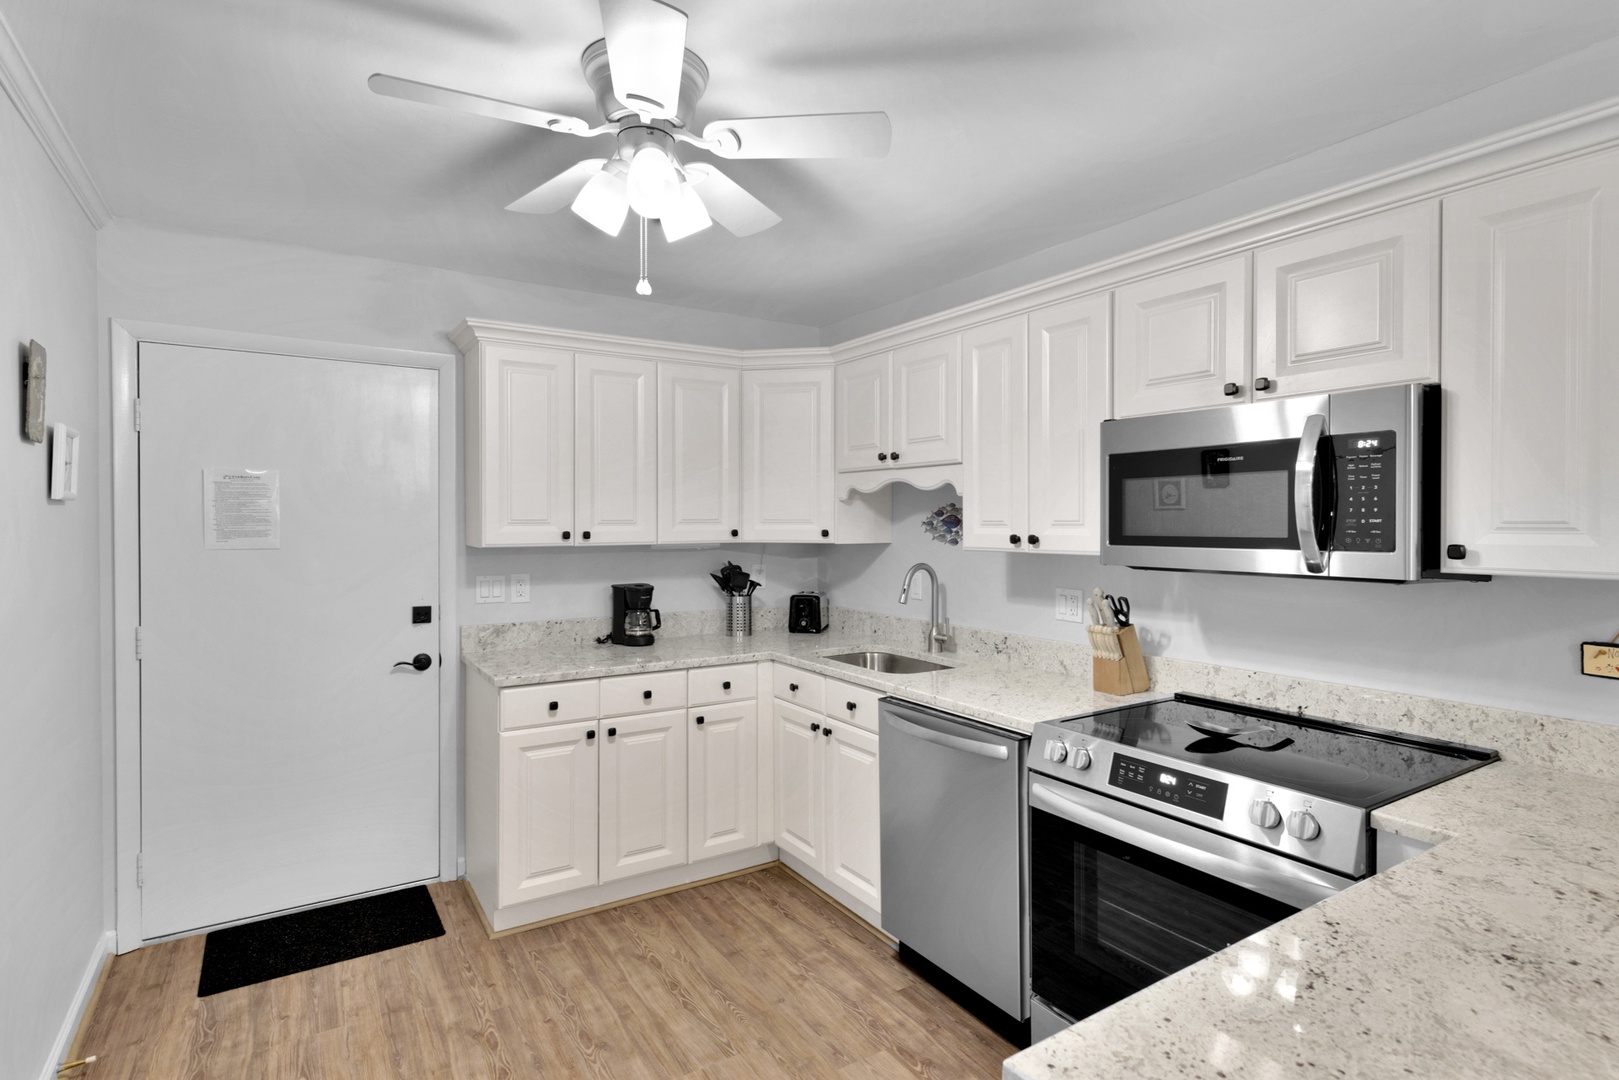 The bright, airy kitchen offers ample space & all the comforts of home